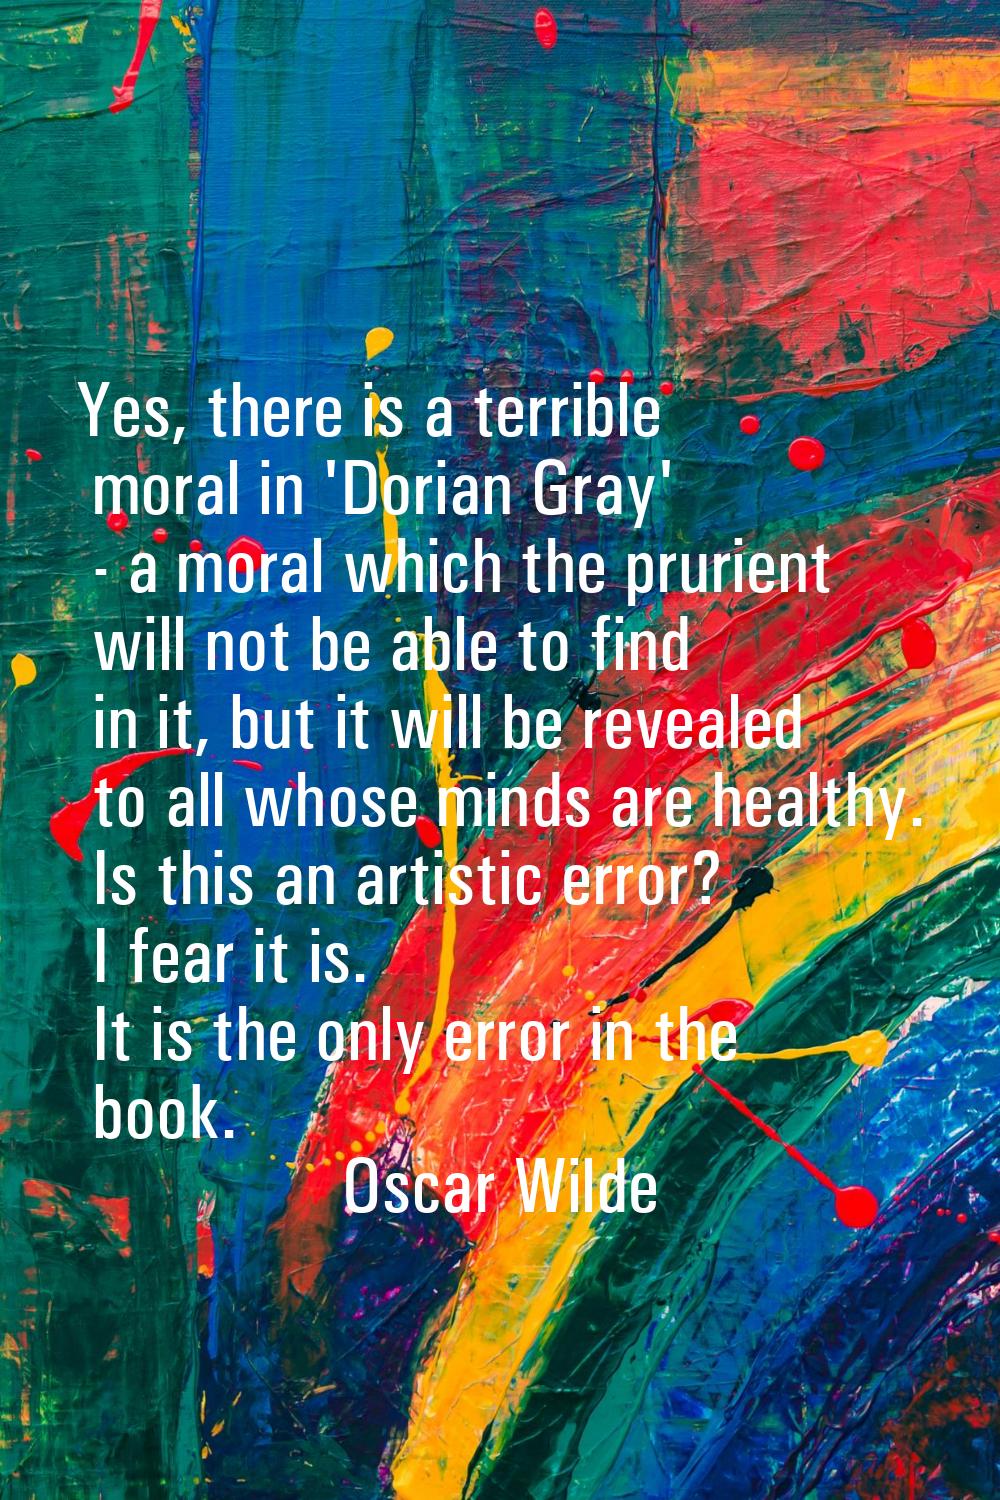 Yes, there is a terrible moral in 'Dorian Gray' - a moral which the prurient will not be able to fi